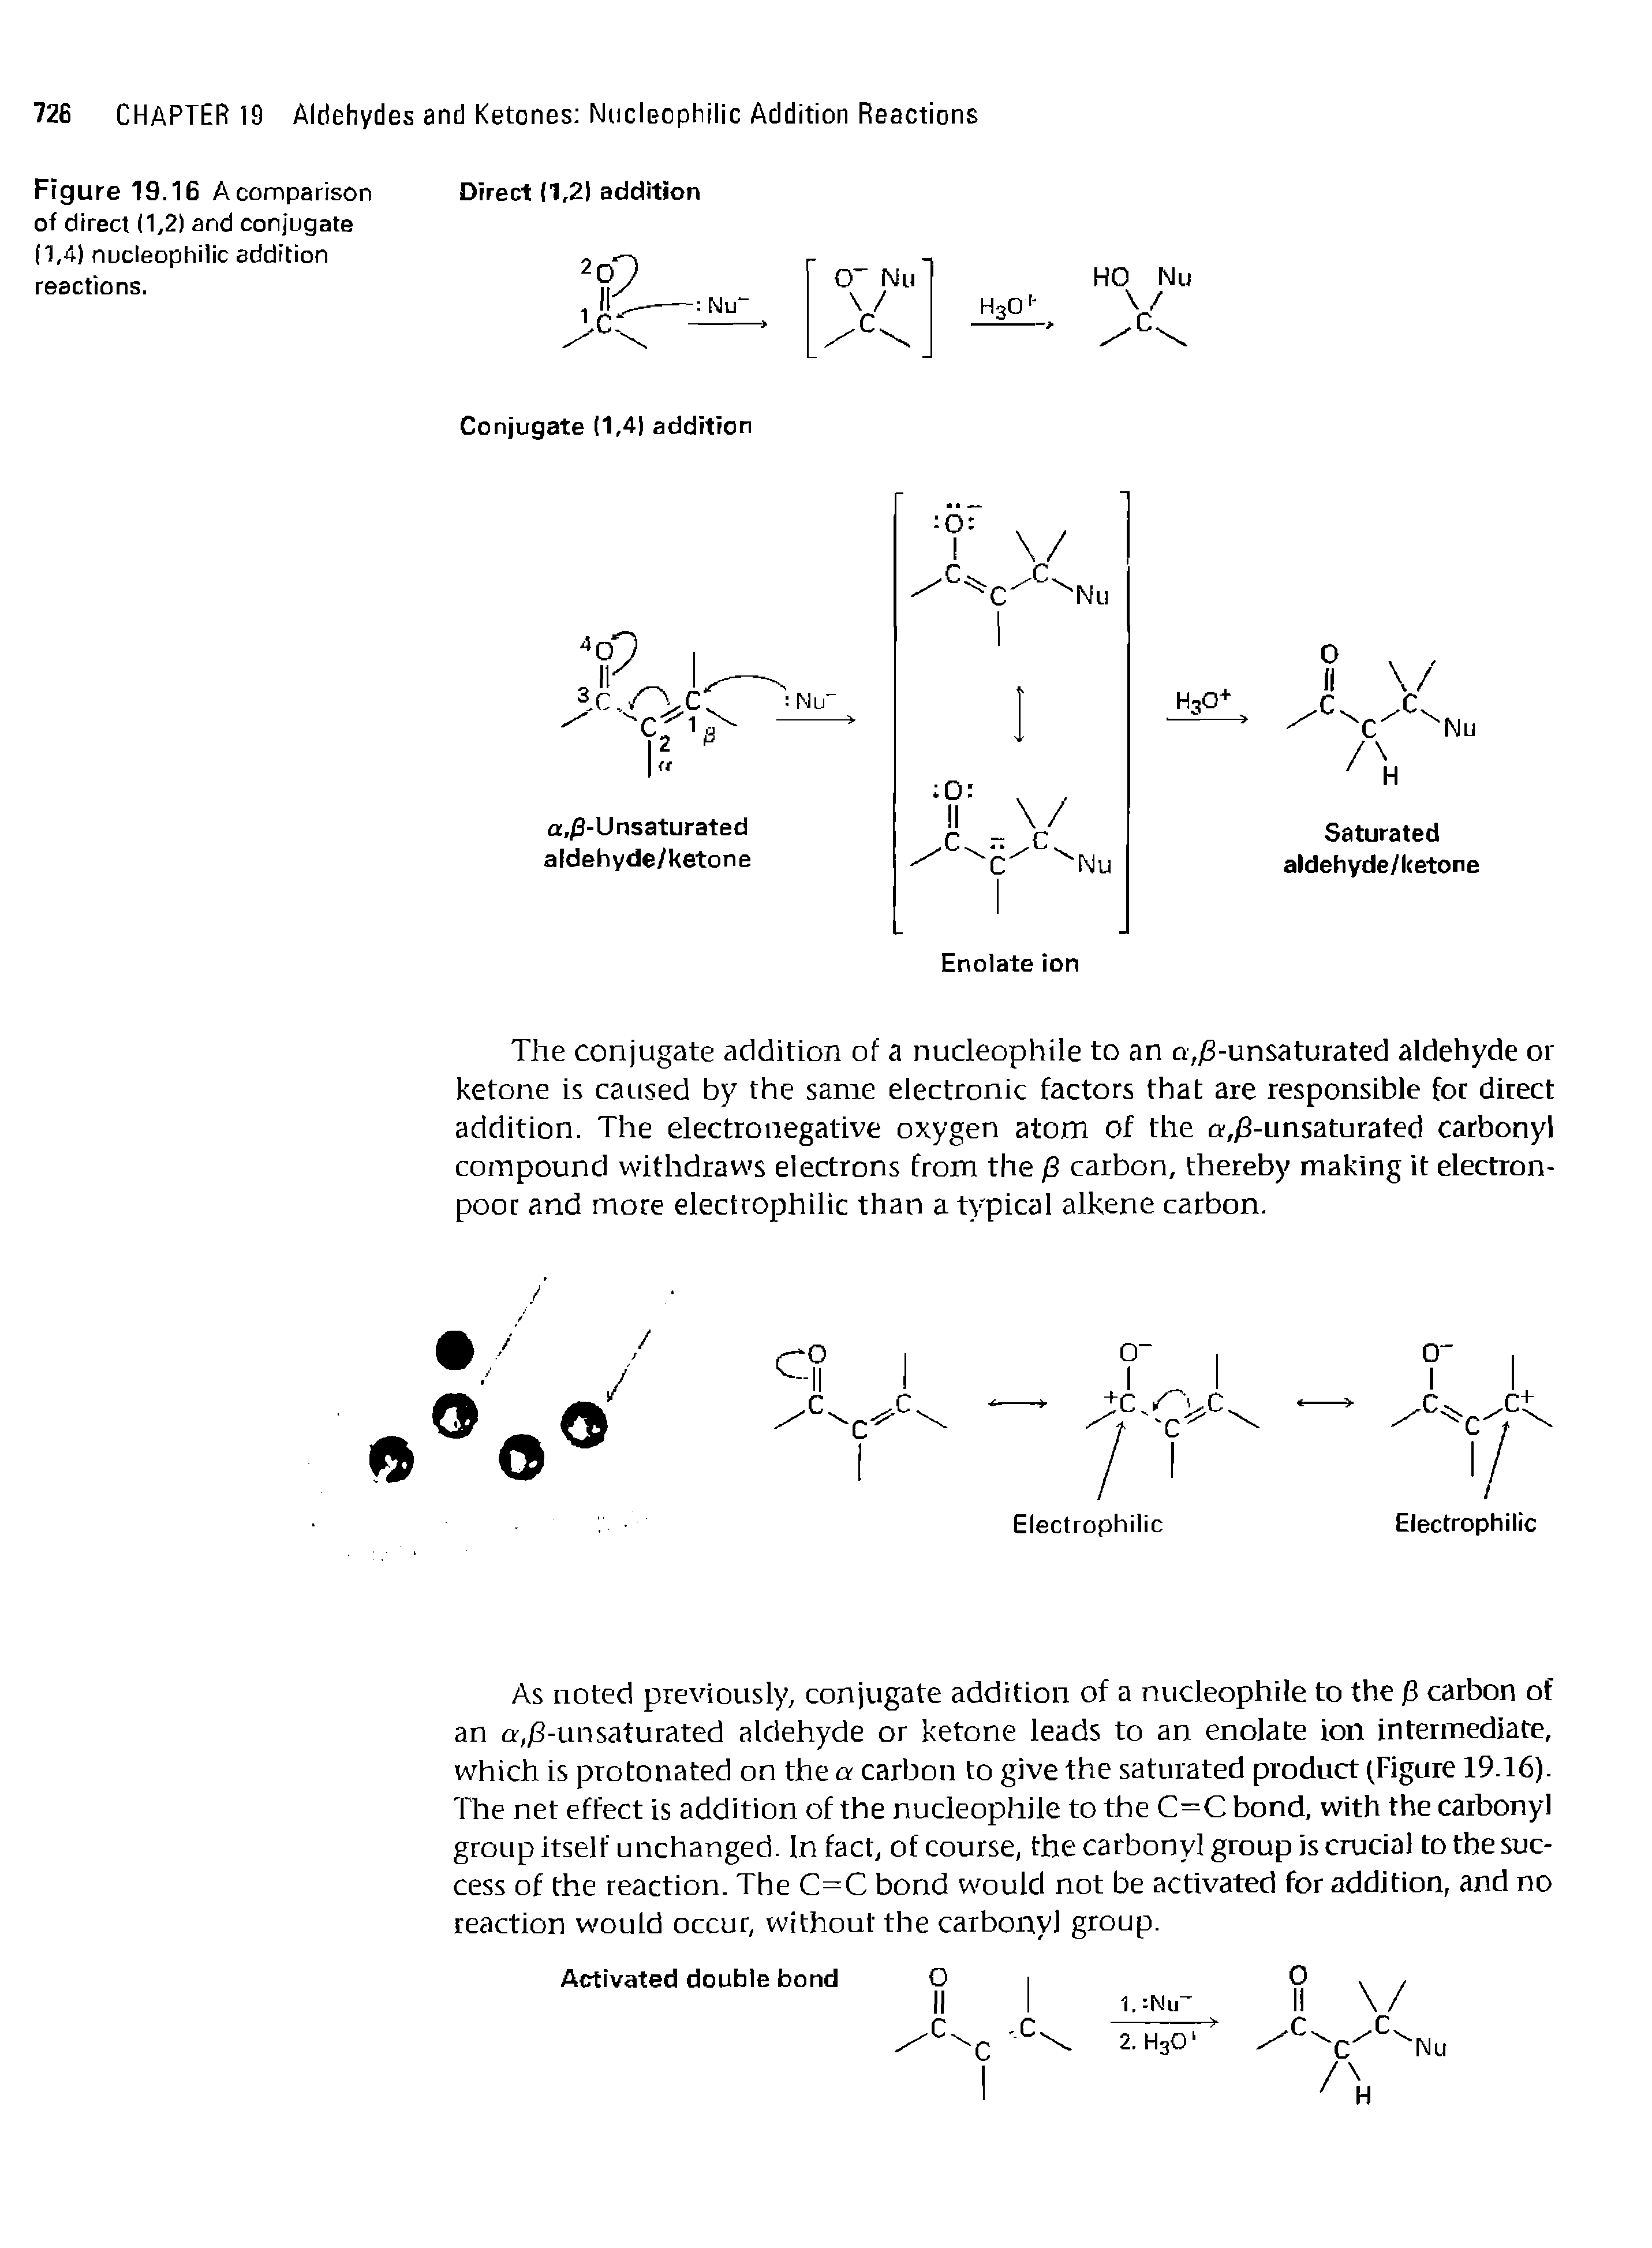 Figure 19.16 A comparison of direct (1,2) and conjugate (1,4) nucleophilic addition reactions.